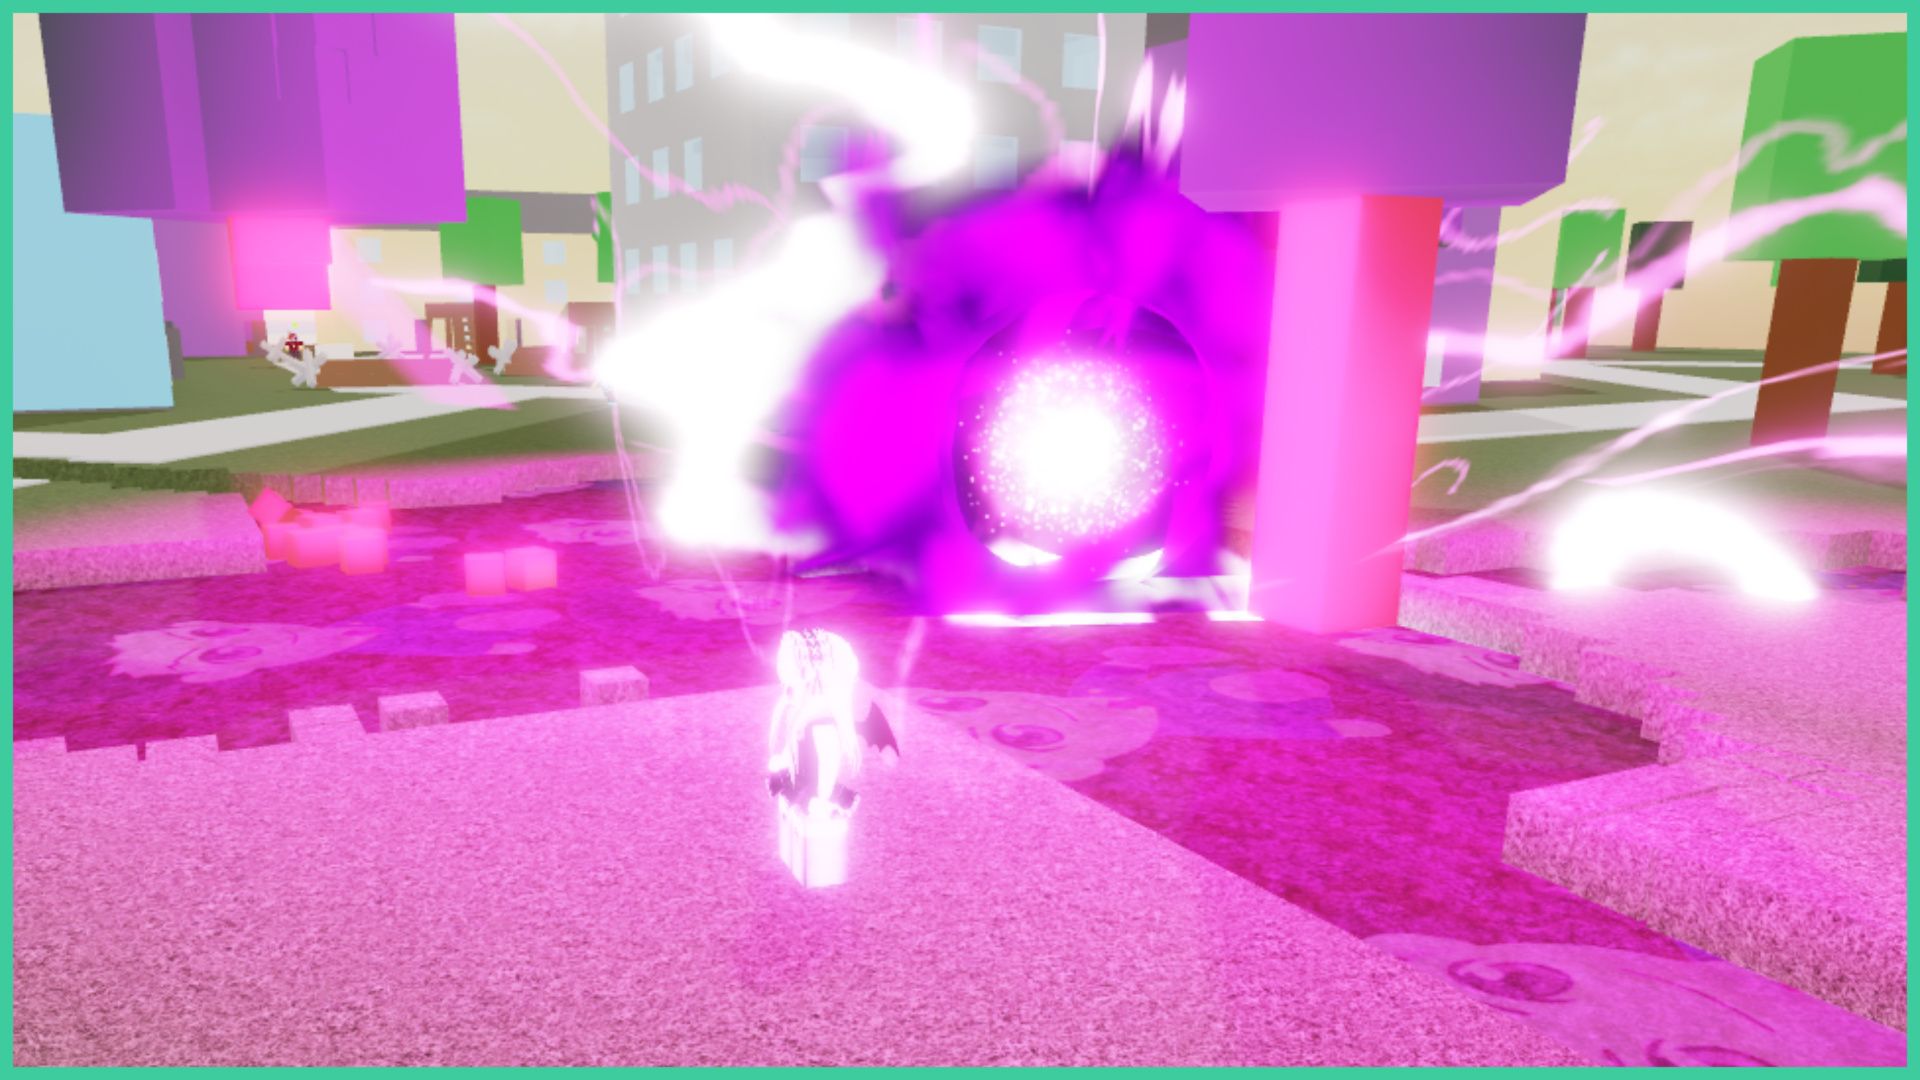 feature image for our jujutsu shenanigans gojo guide, the hollow purple ability is active, with a giant purple glowing orb in the center of the arena, destroying the ground and leaving debris on the floor